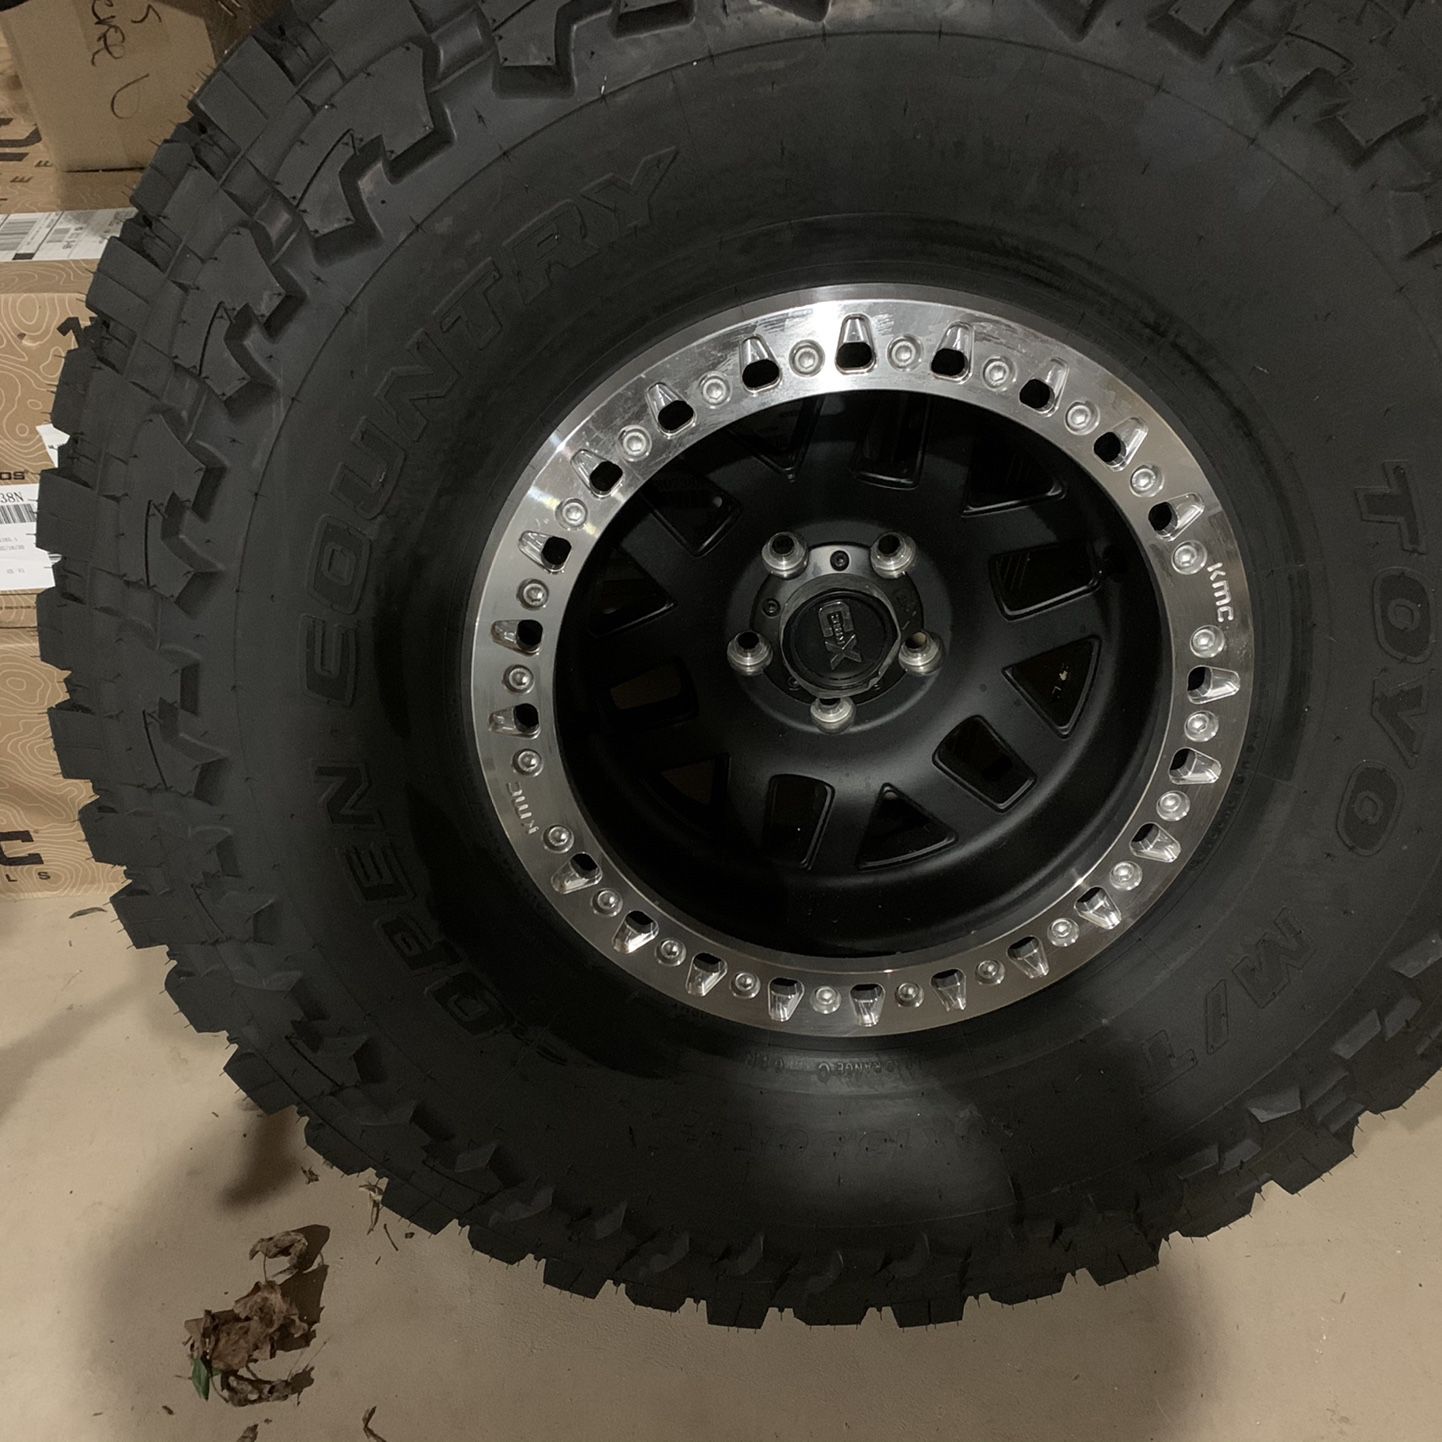 Xd-229 Machete Crawl Bead lock Wheel In A 17/9... 5 Lug Bolt Pattern... RIMS ONLY!!! 3000 With Tires!!! 40 Toyo  Open Country